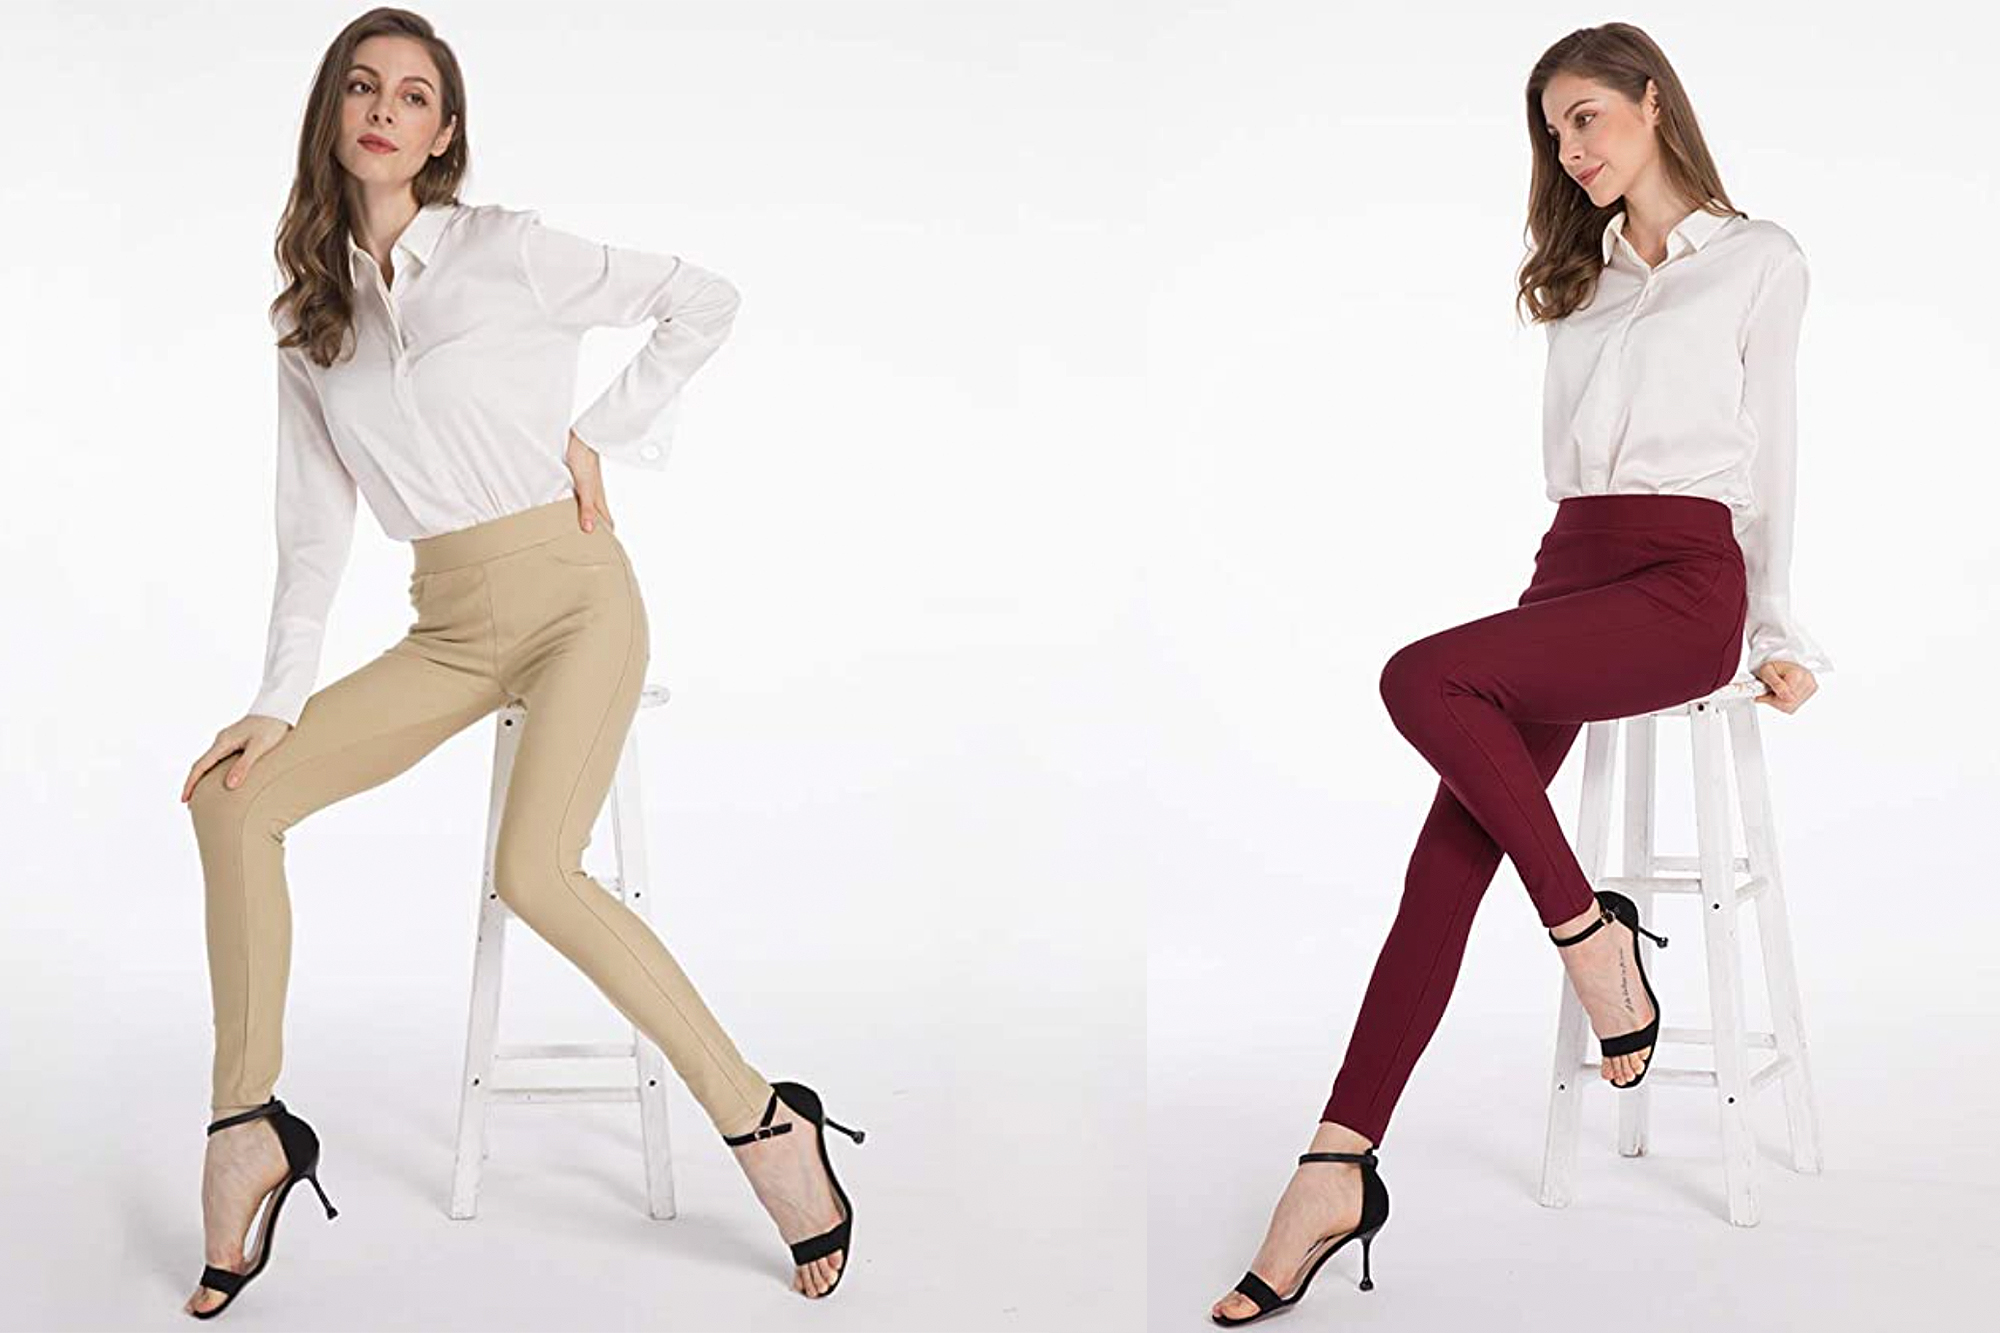 Ginasy Stretch Dress Pants Make Going Back to the Office Easier